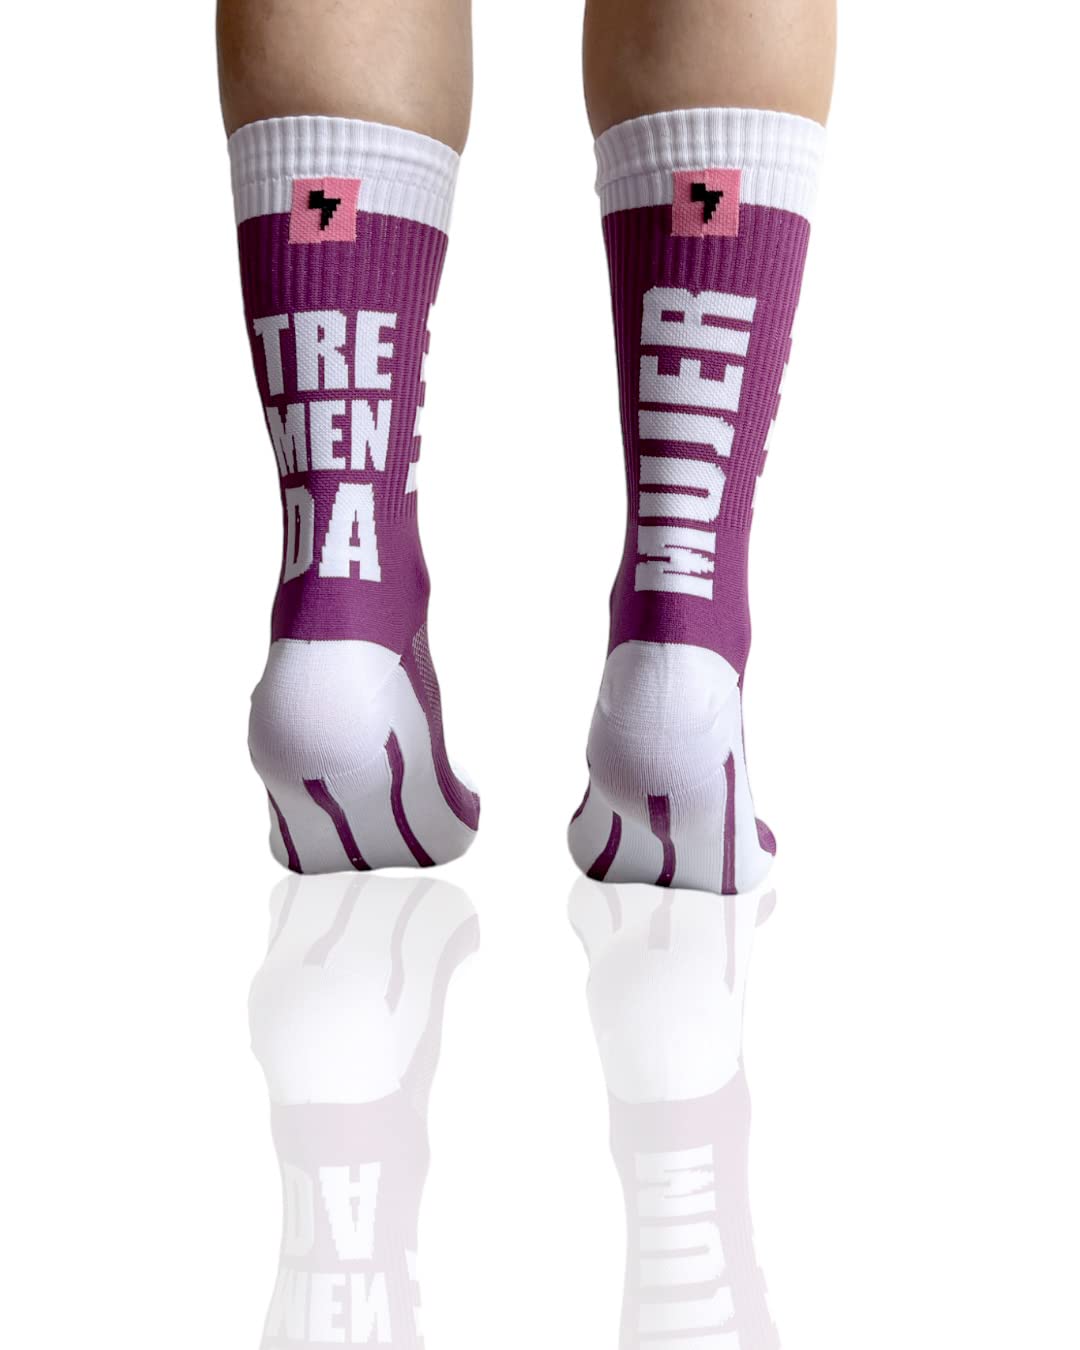 in s(h)ock Barcelona Sport Socks for Men and Women - Long Seamless Socks - Perfect for Cycling, Running, Padel and Basketball